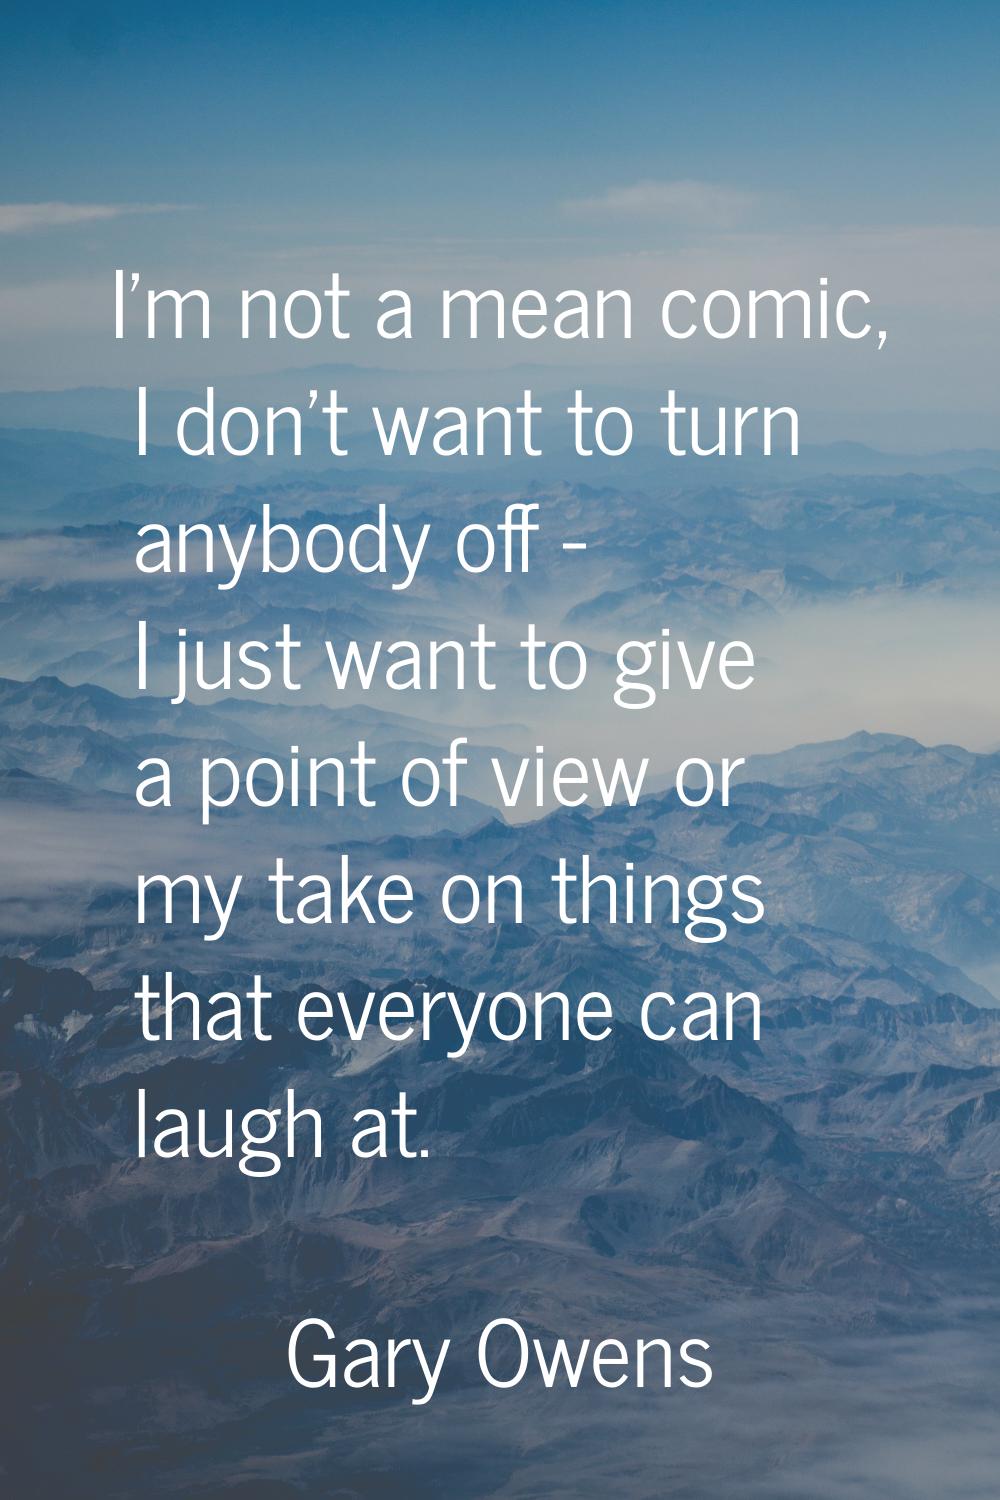 I'm not a mean comic, I don't want to turn anybody off - I just want to give a point of view or my 